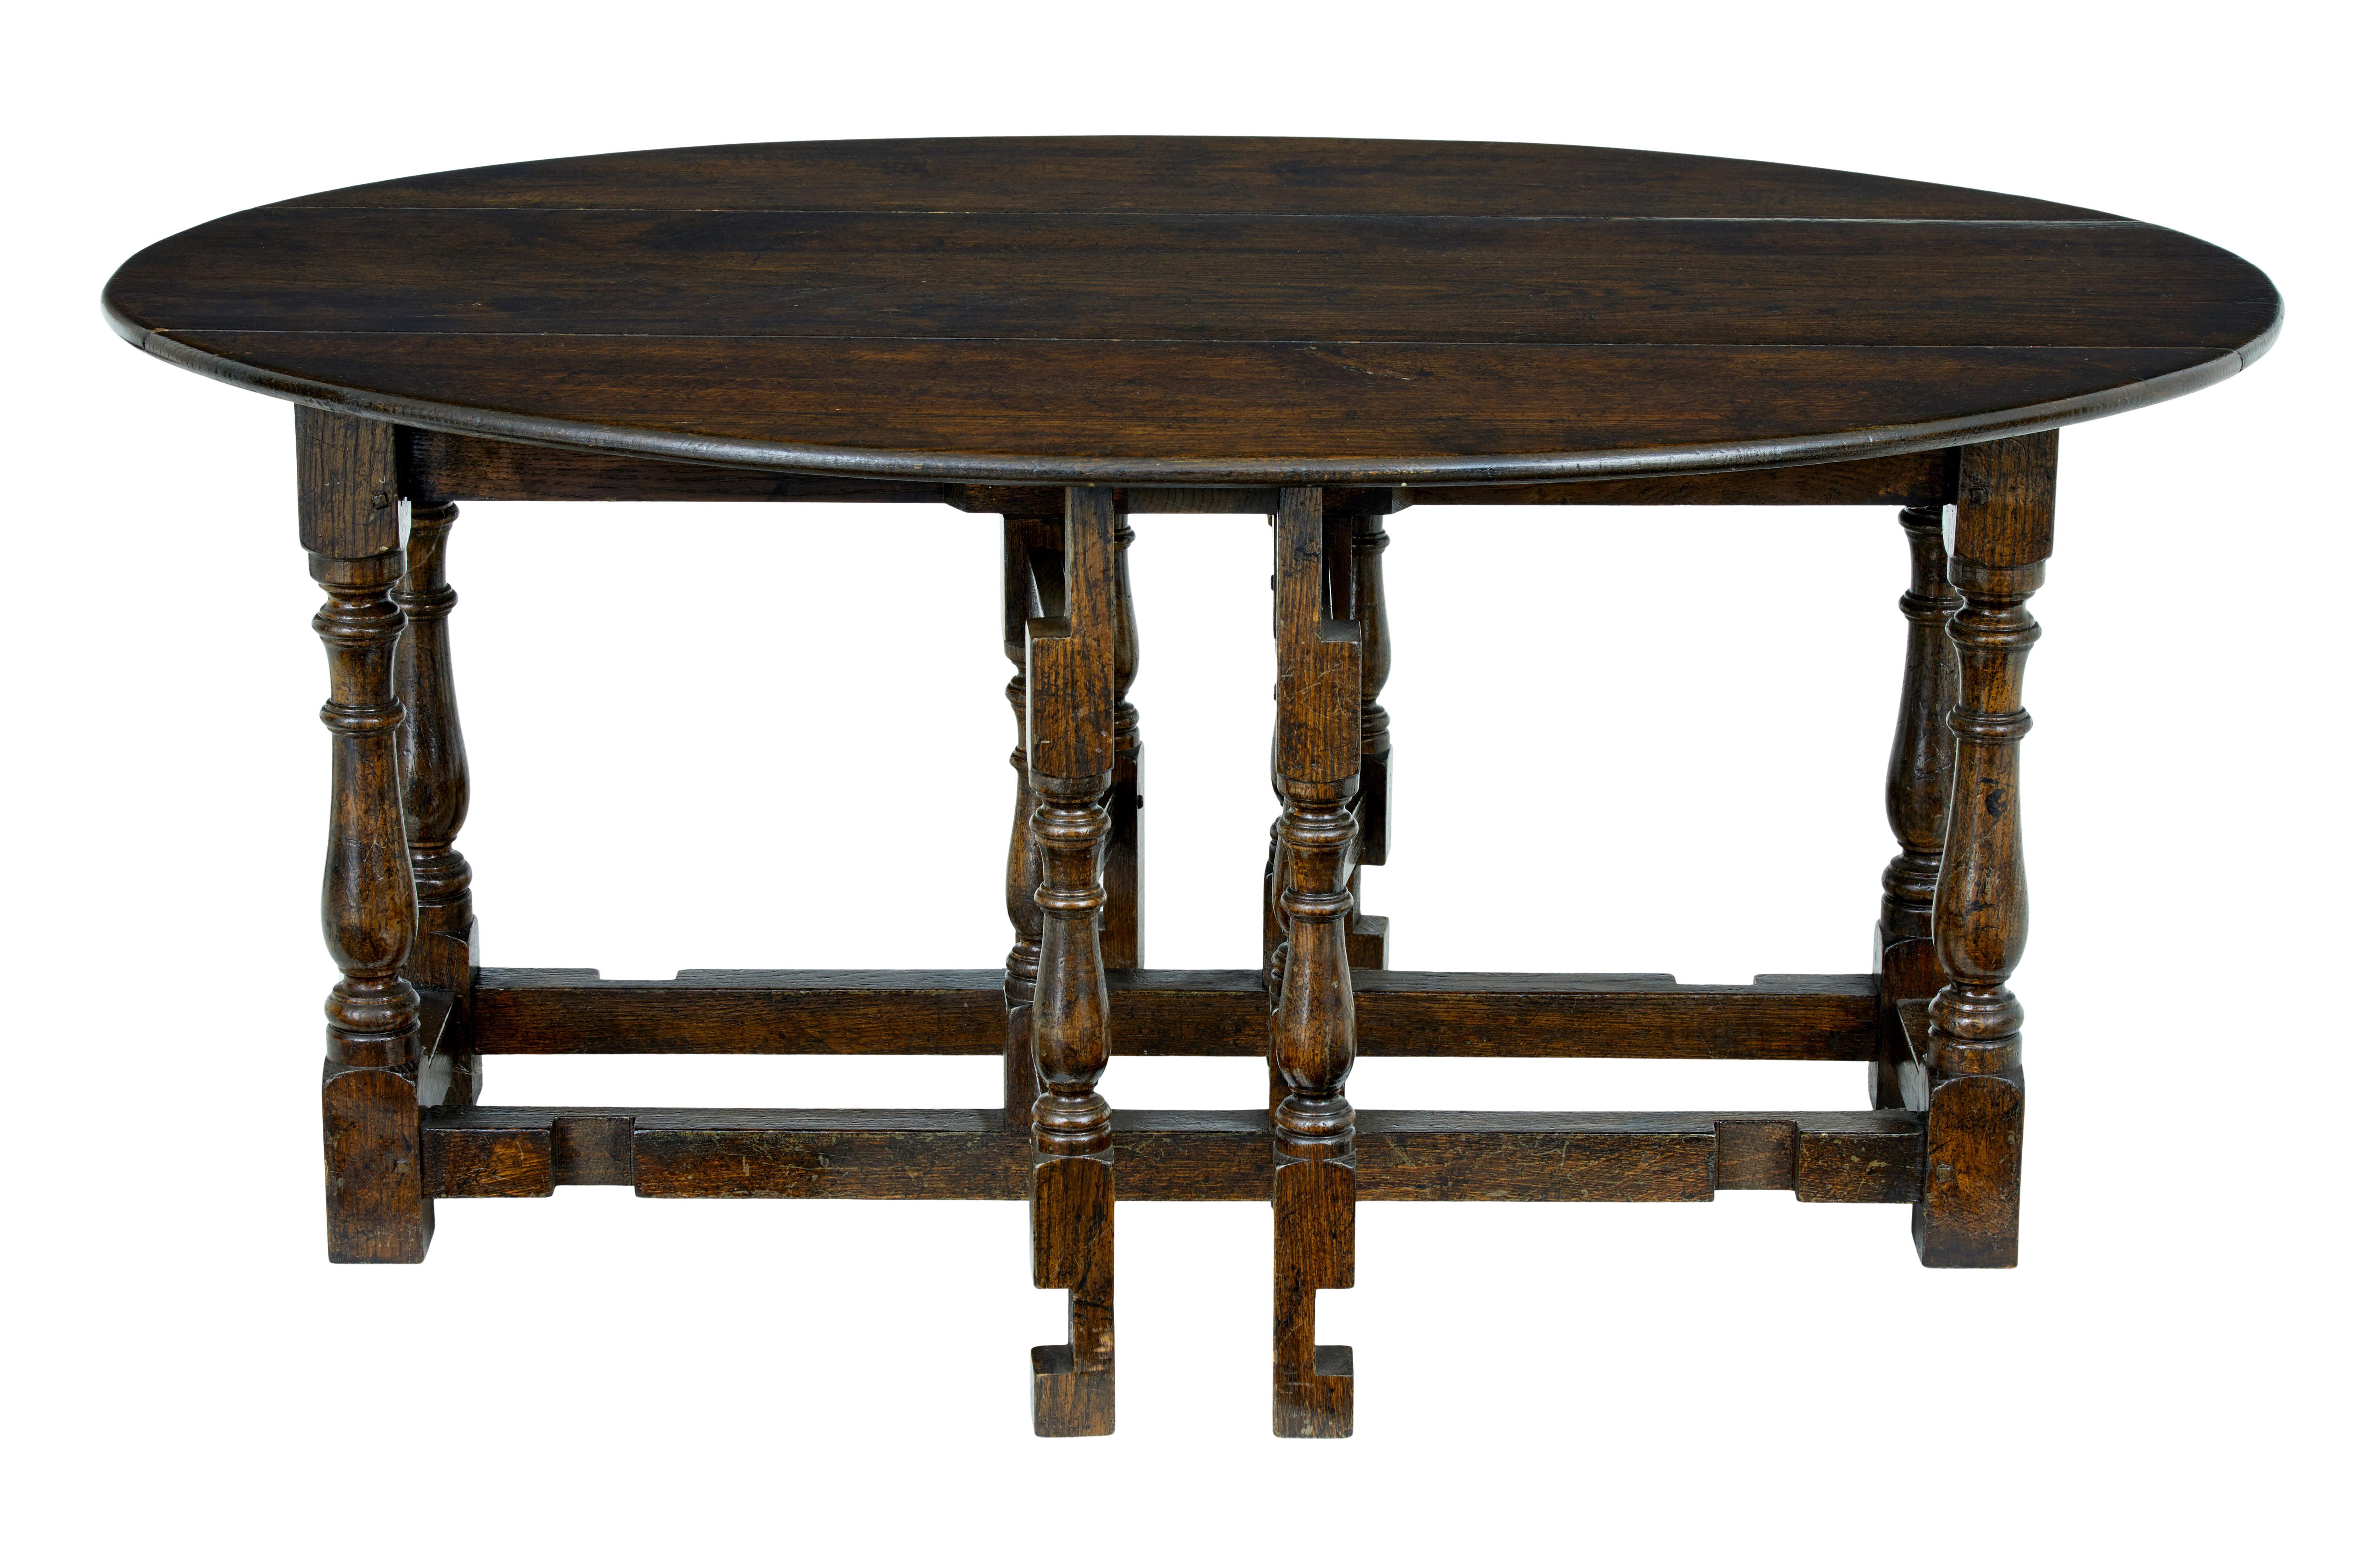 Good quality Georgian style oak gateleg table.

Gateleg design which has been incorparated into coffee table for modern day use.

Solid oak used, minor surface marks to legs. Top opens to form a oval shaped top.

Depth open: 35 1/2